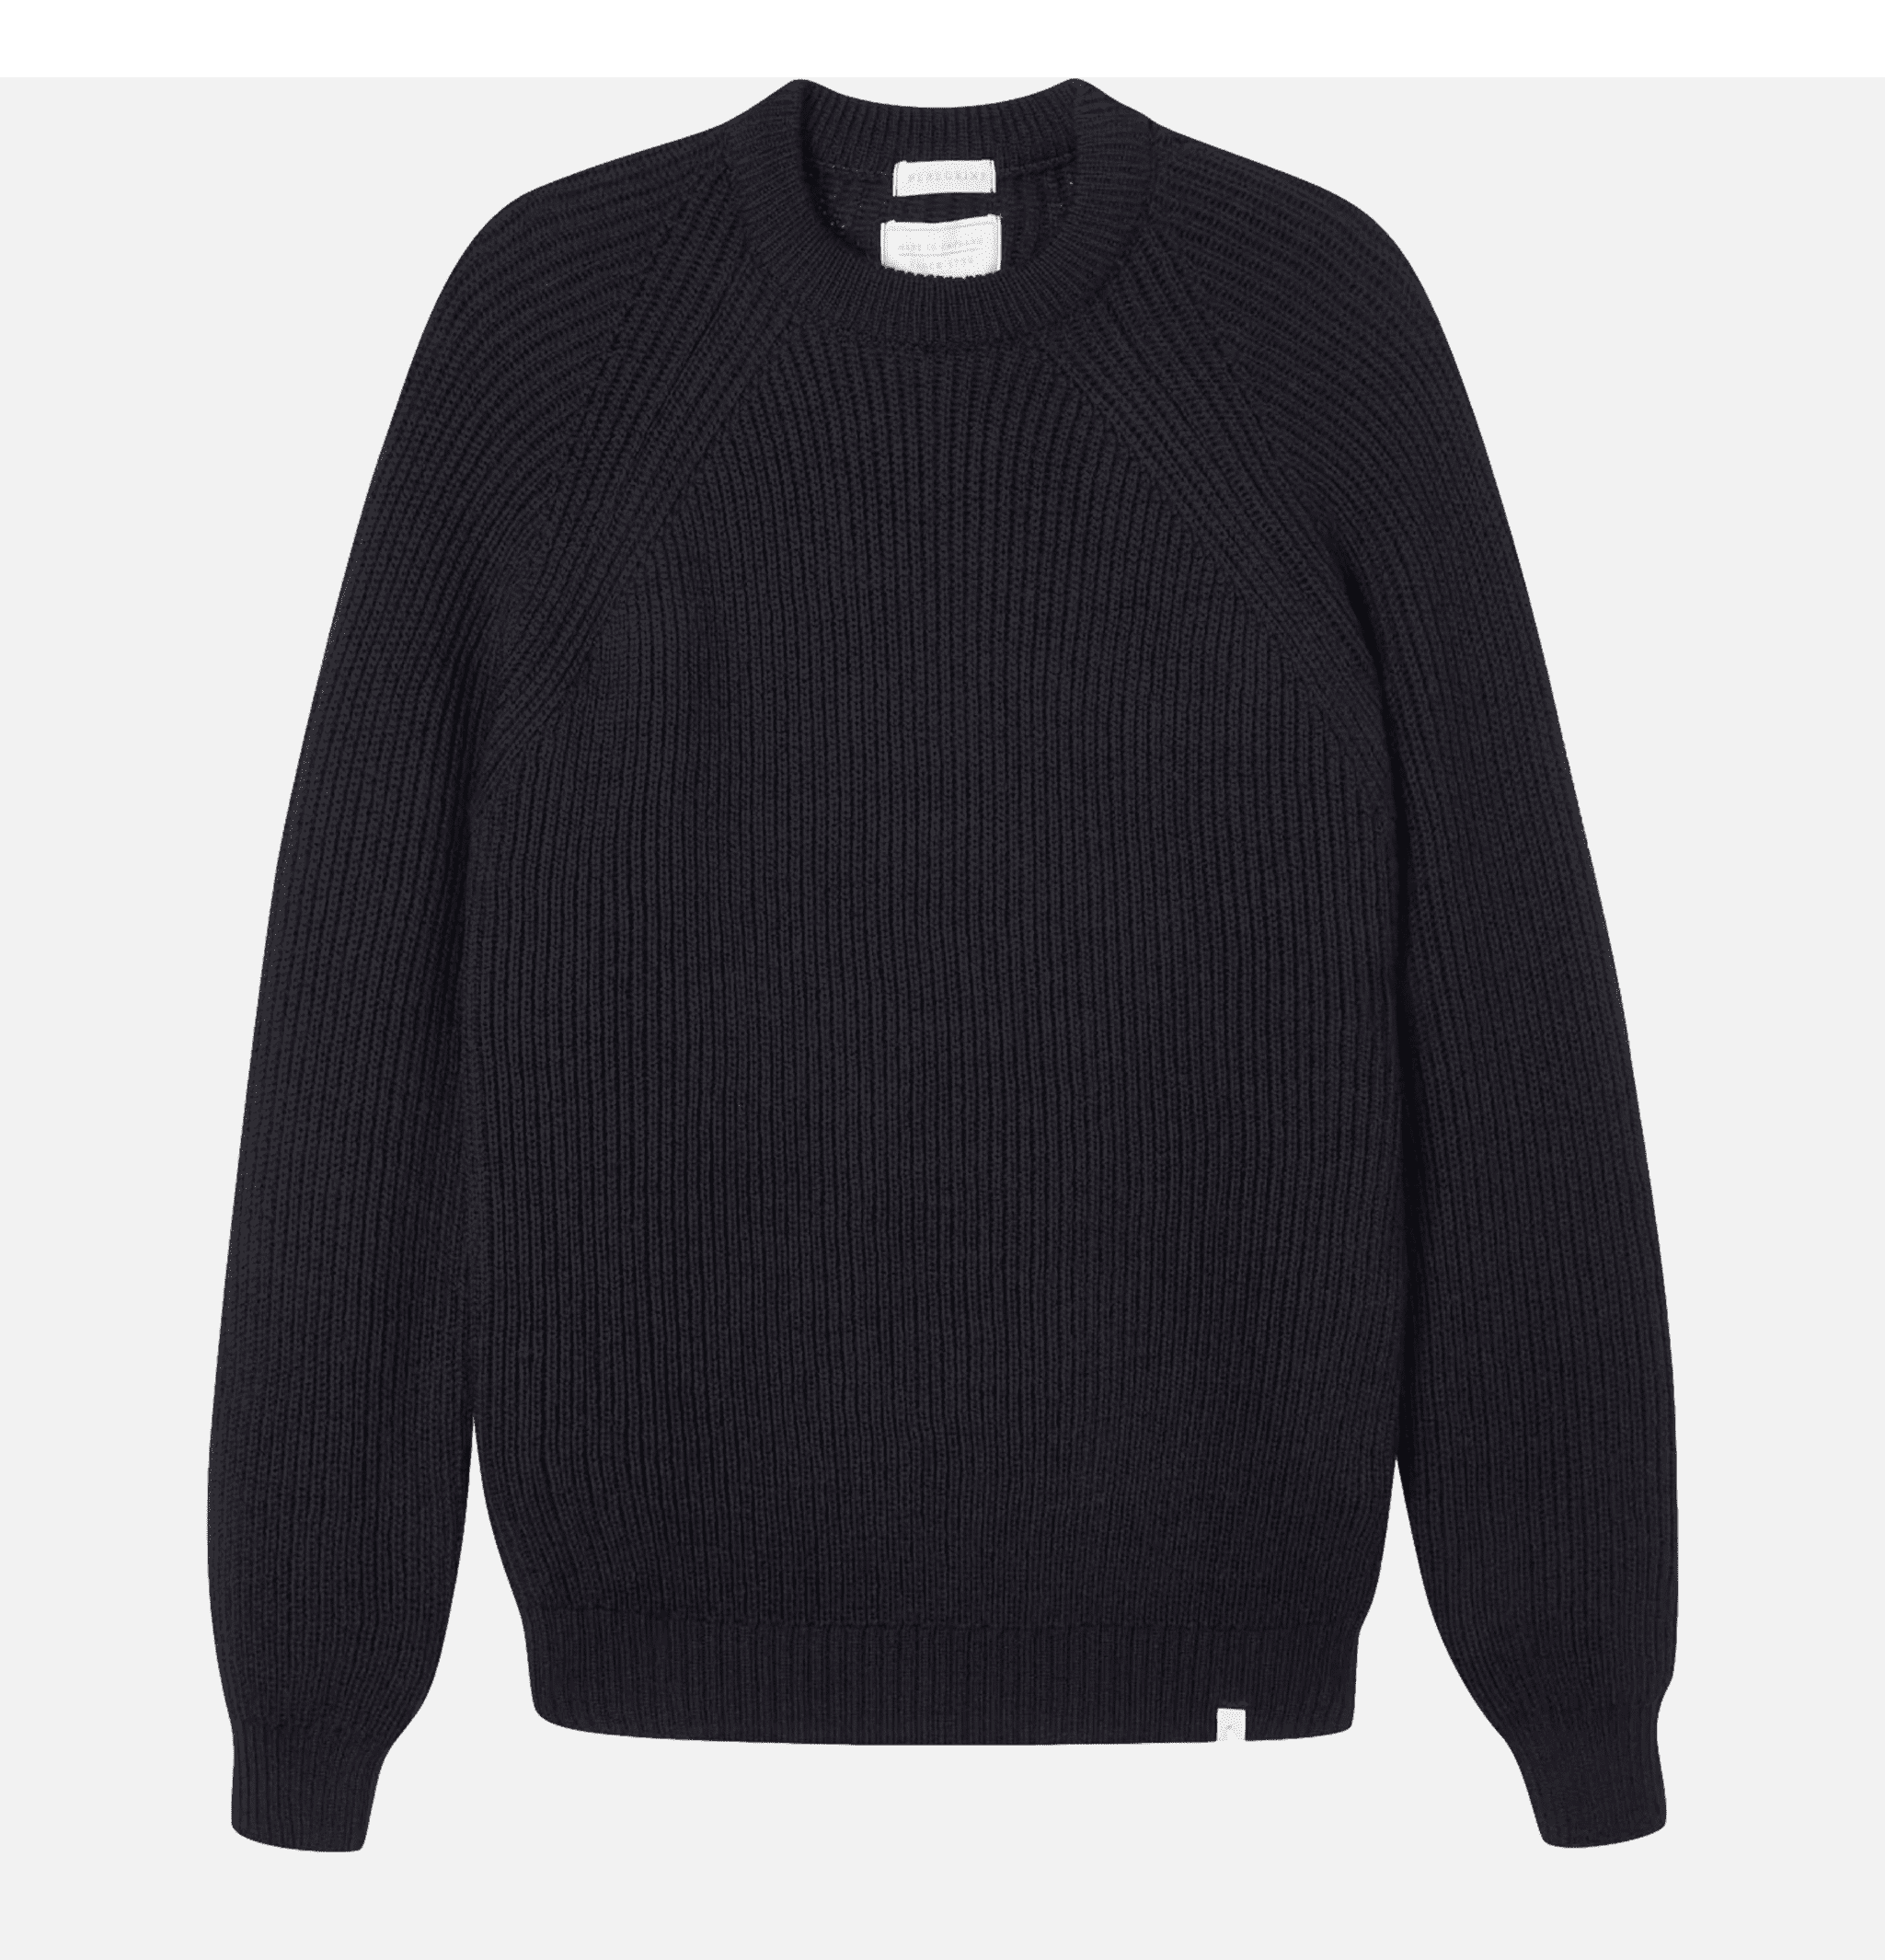 Peregrine Ford Crew Knit Navy